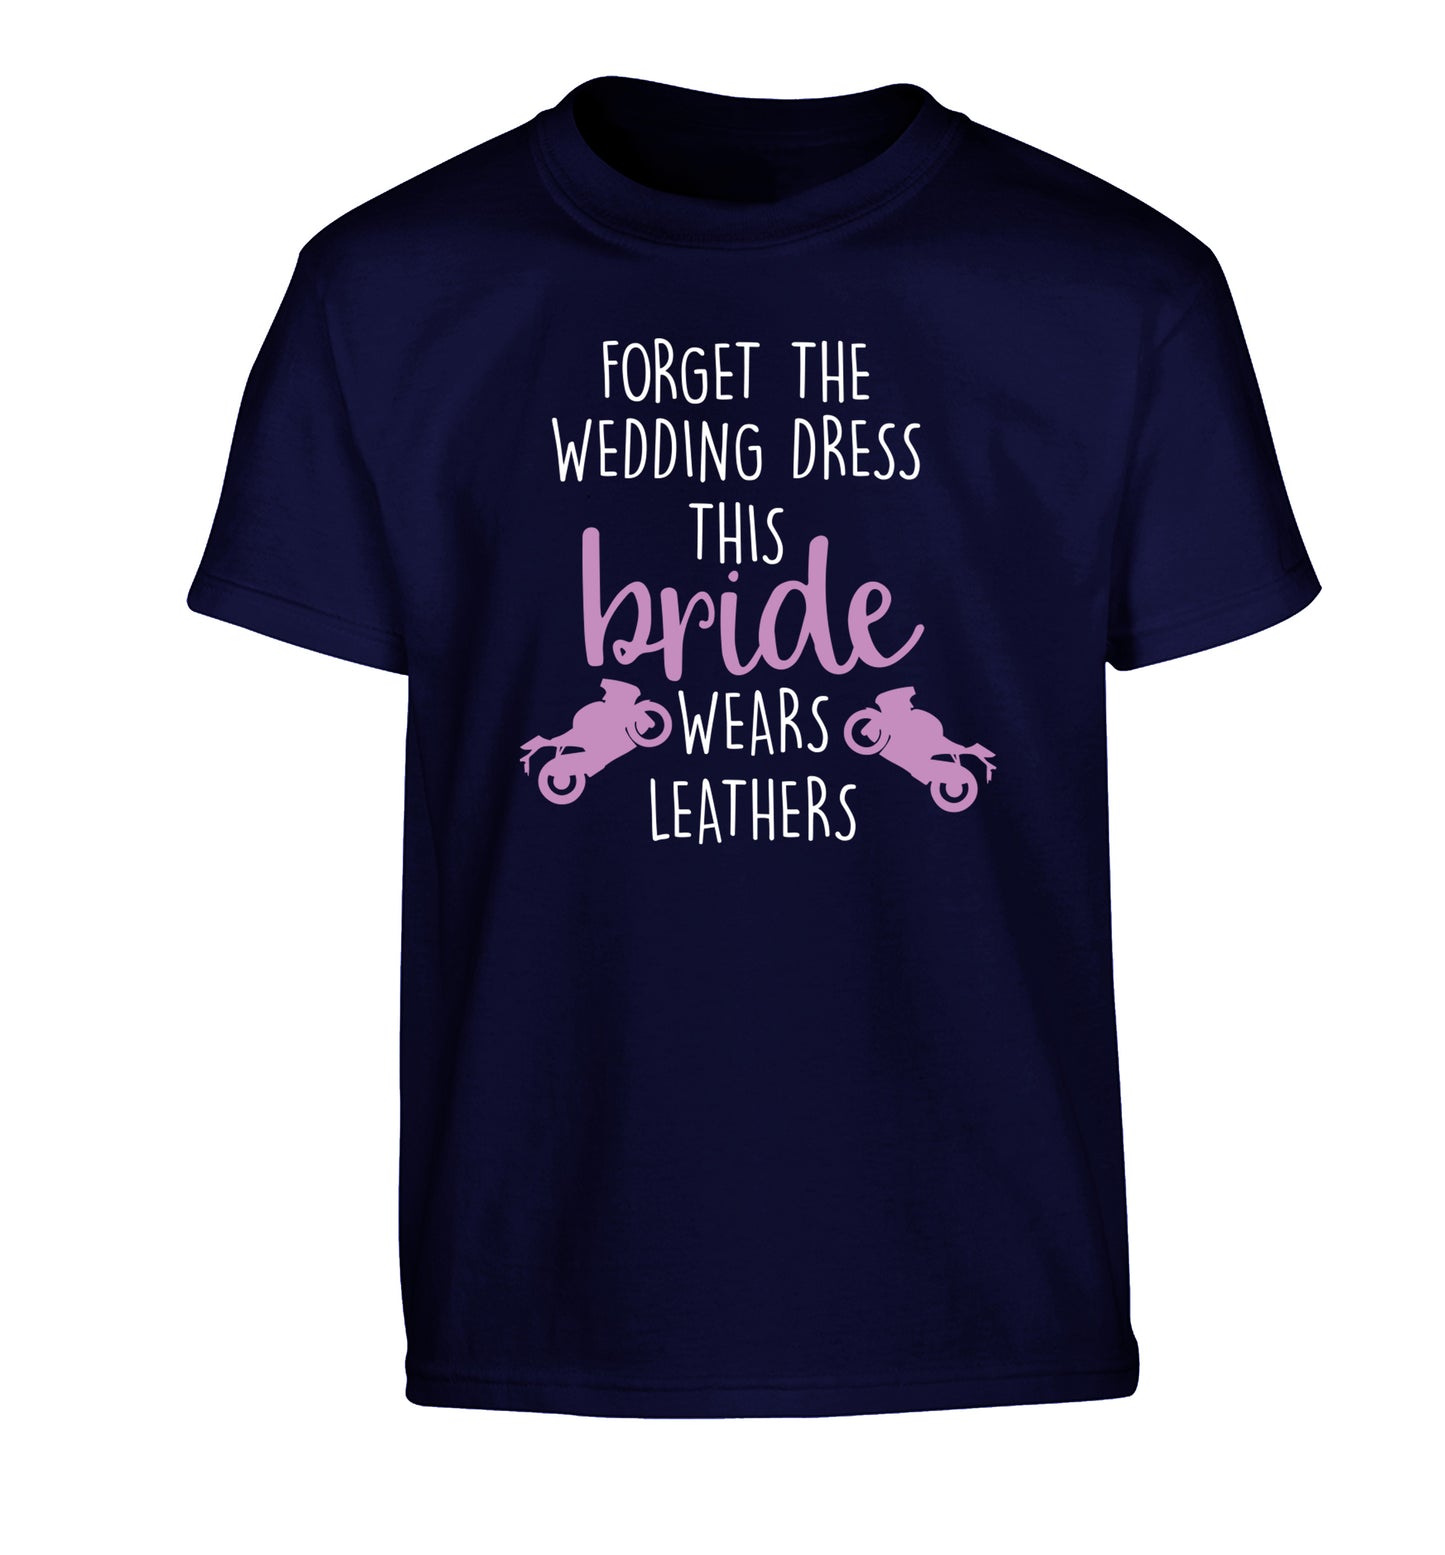 Forget the wedding dress this bride wears leathers Children's navy Tshirt 12-13 Years